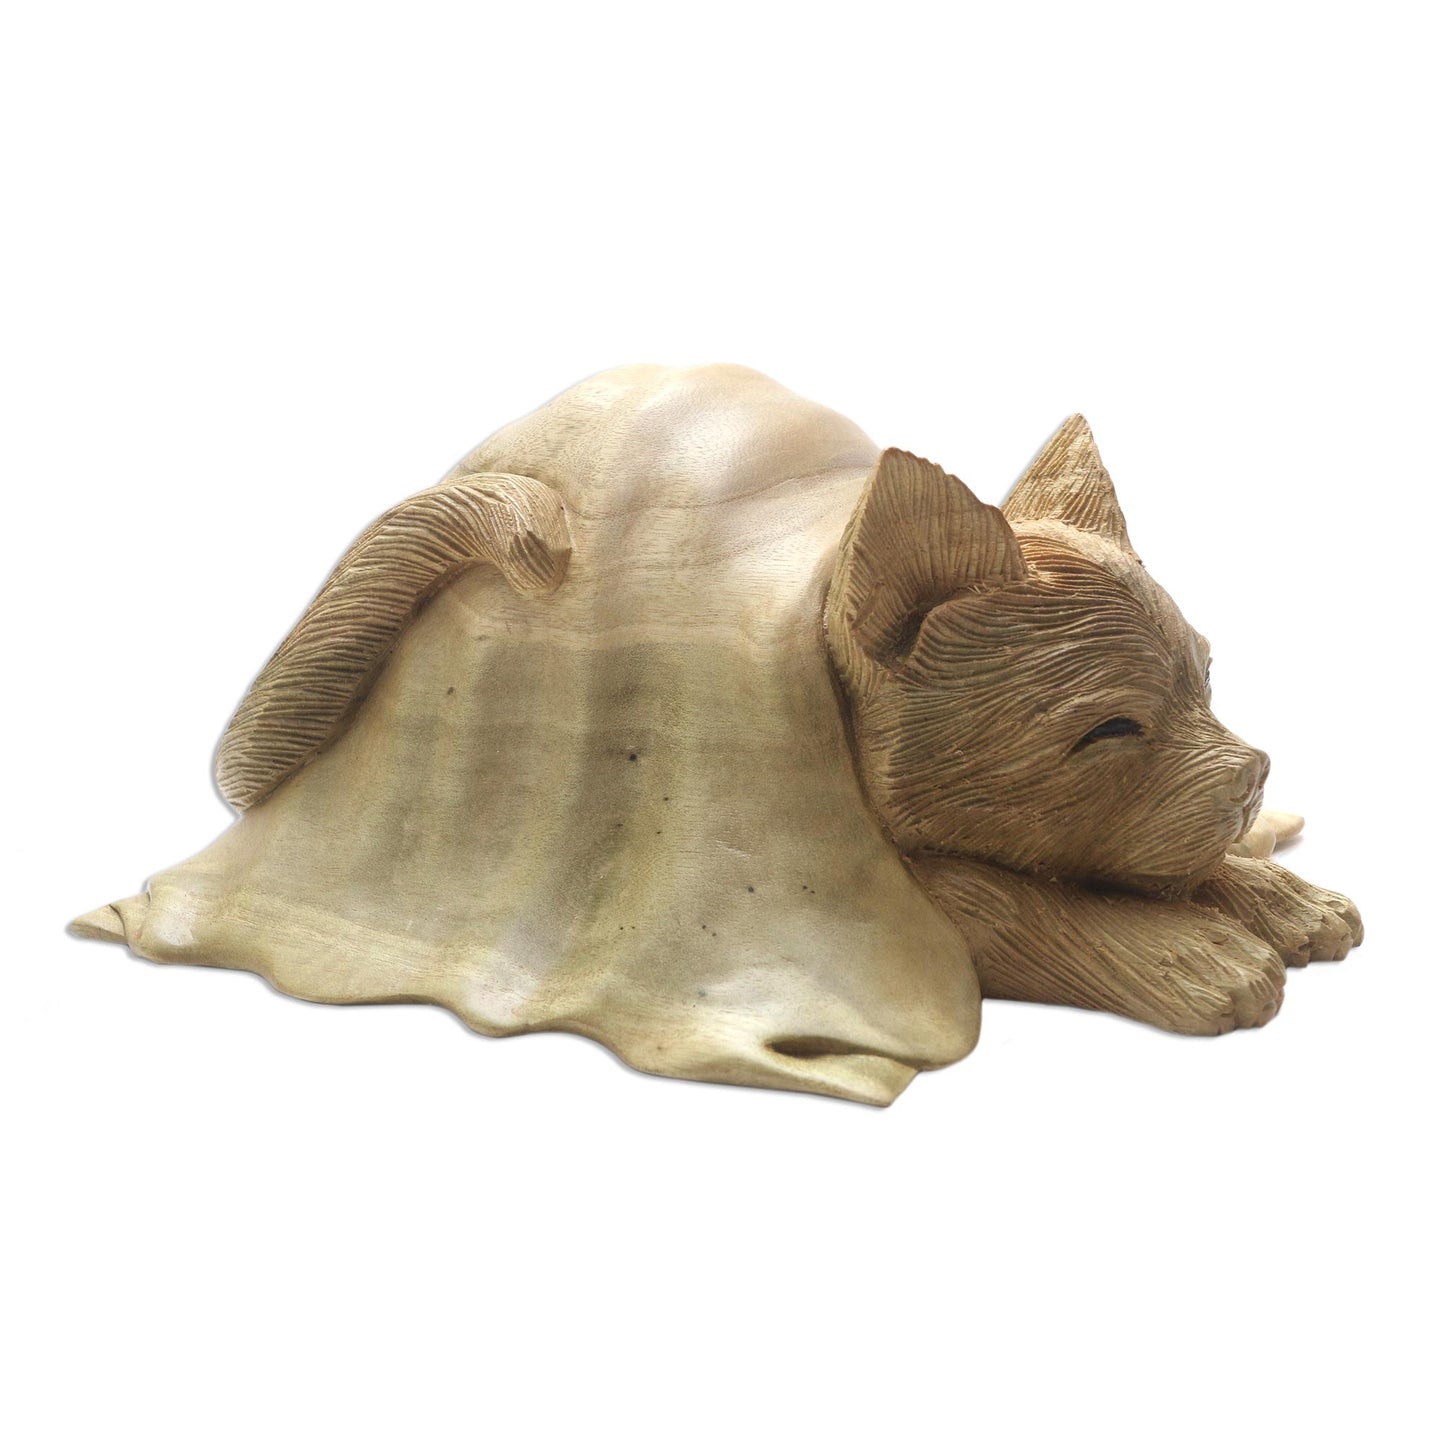 Chilly Cat Hibiscus Wood Sculpture of a Cat in a Blanket from Bali